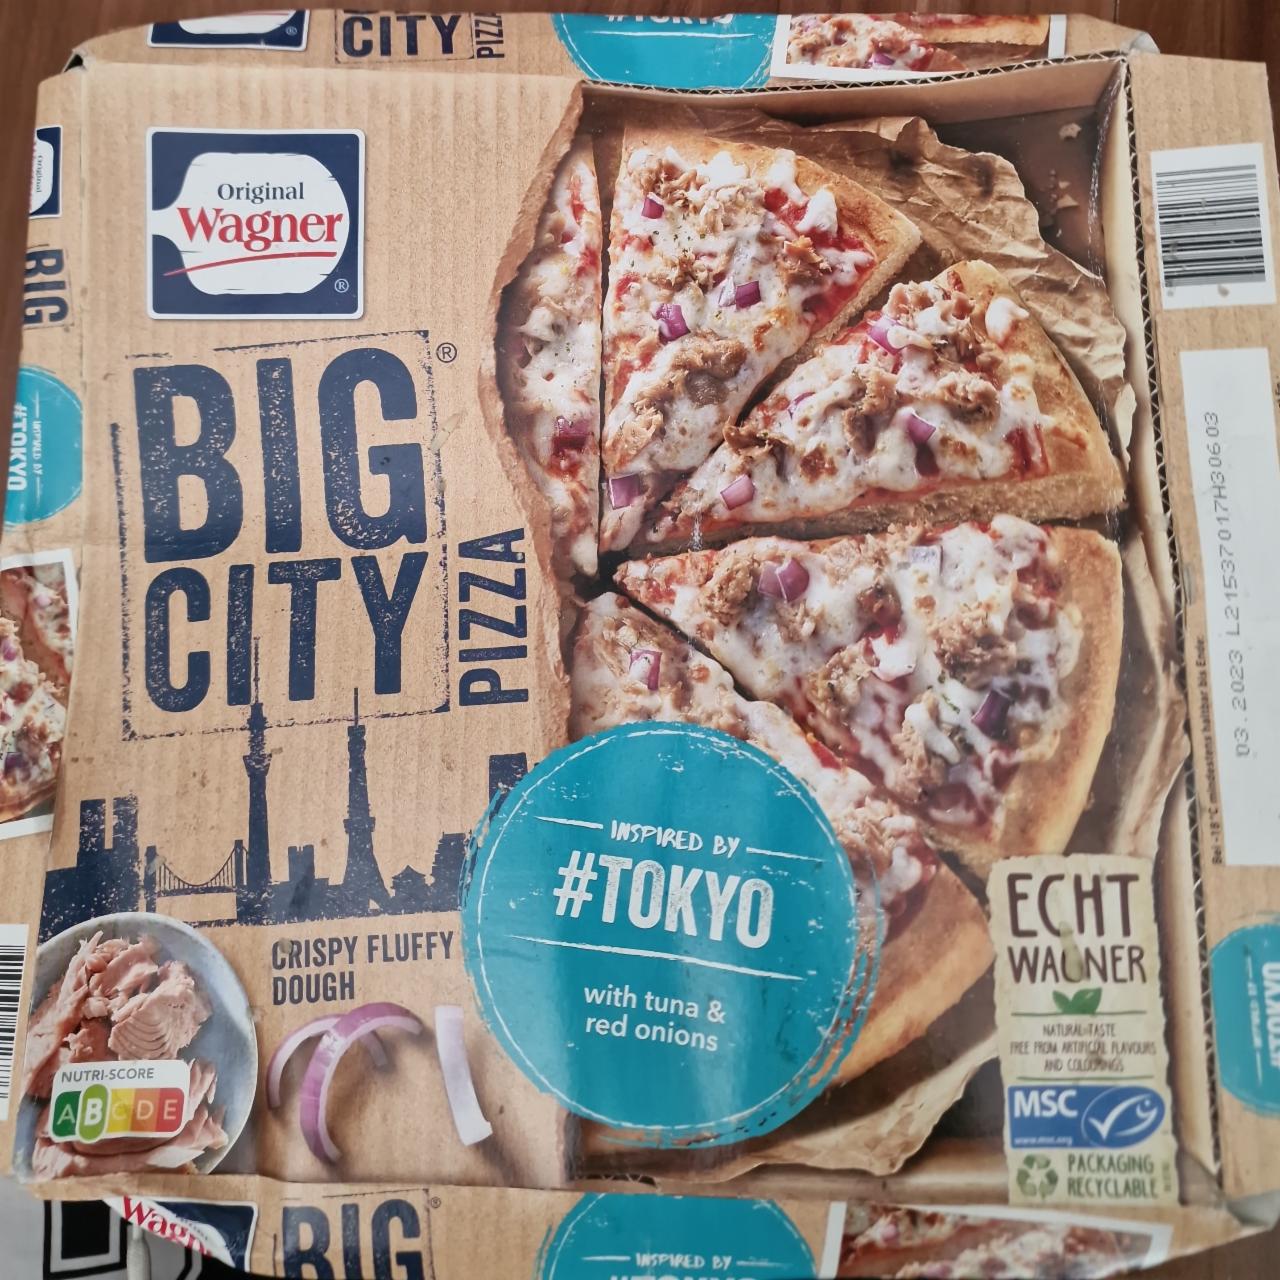 Képek - Big city pizza Tokyo with tuna & red onions Wagner